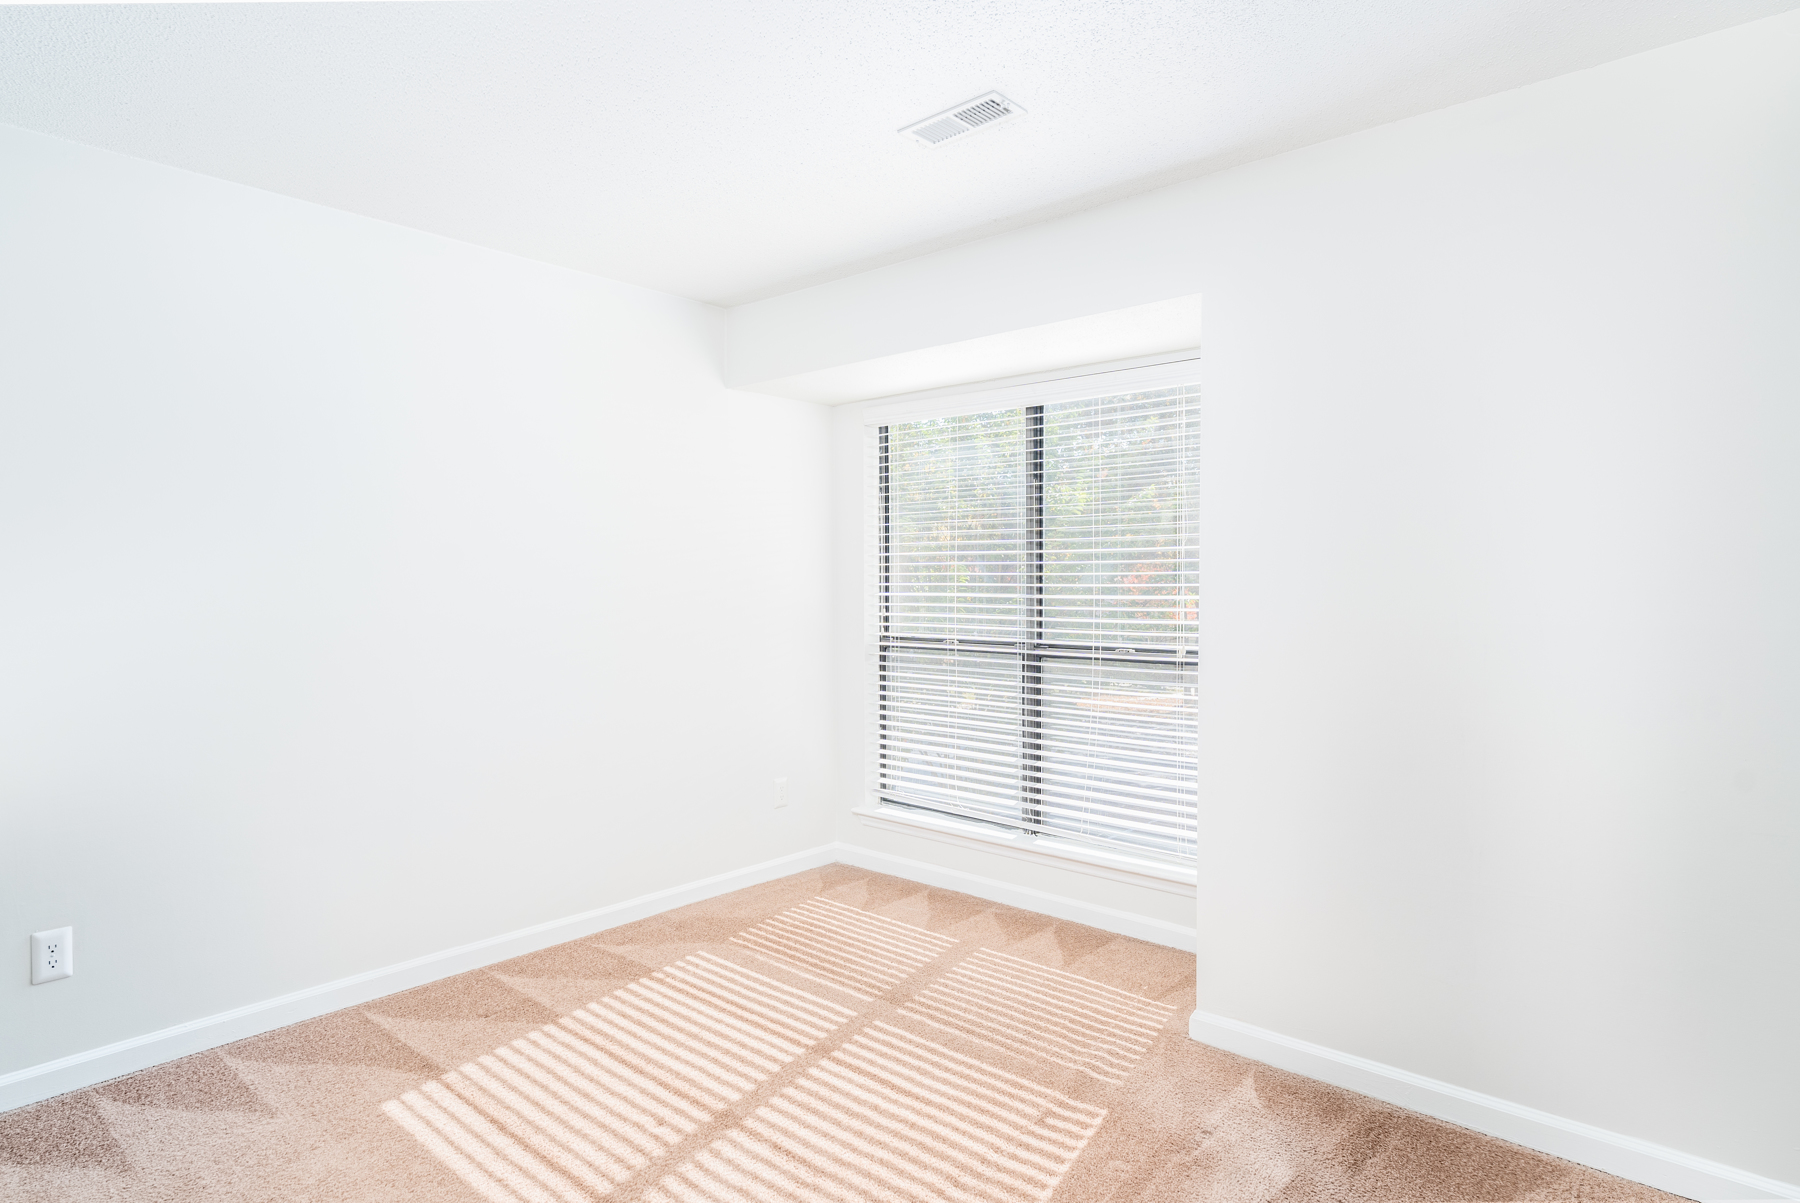 Carpeted room with large window at Huntsview Apartments in Greensboro, North Carolina